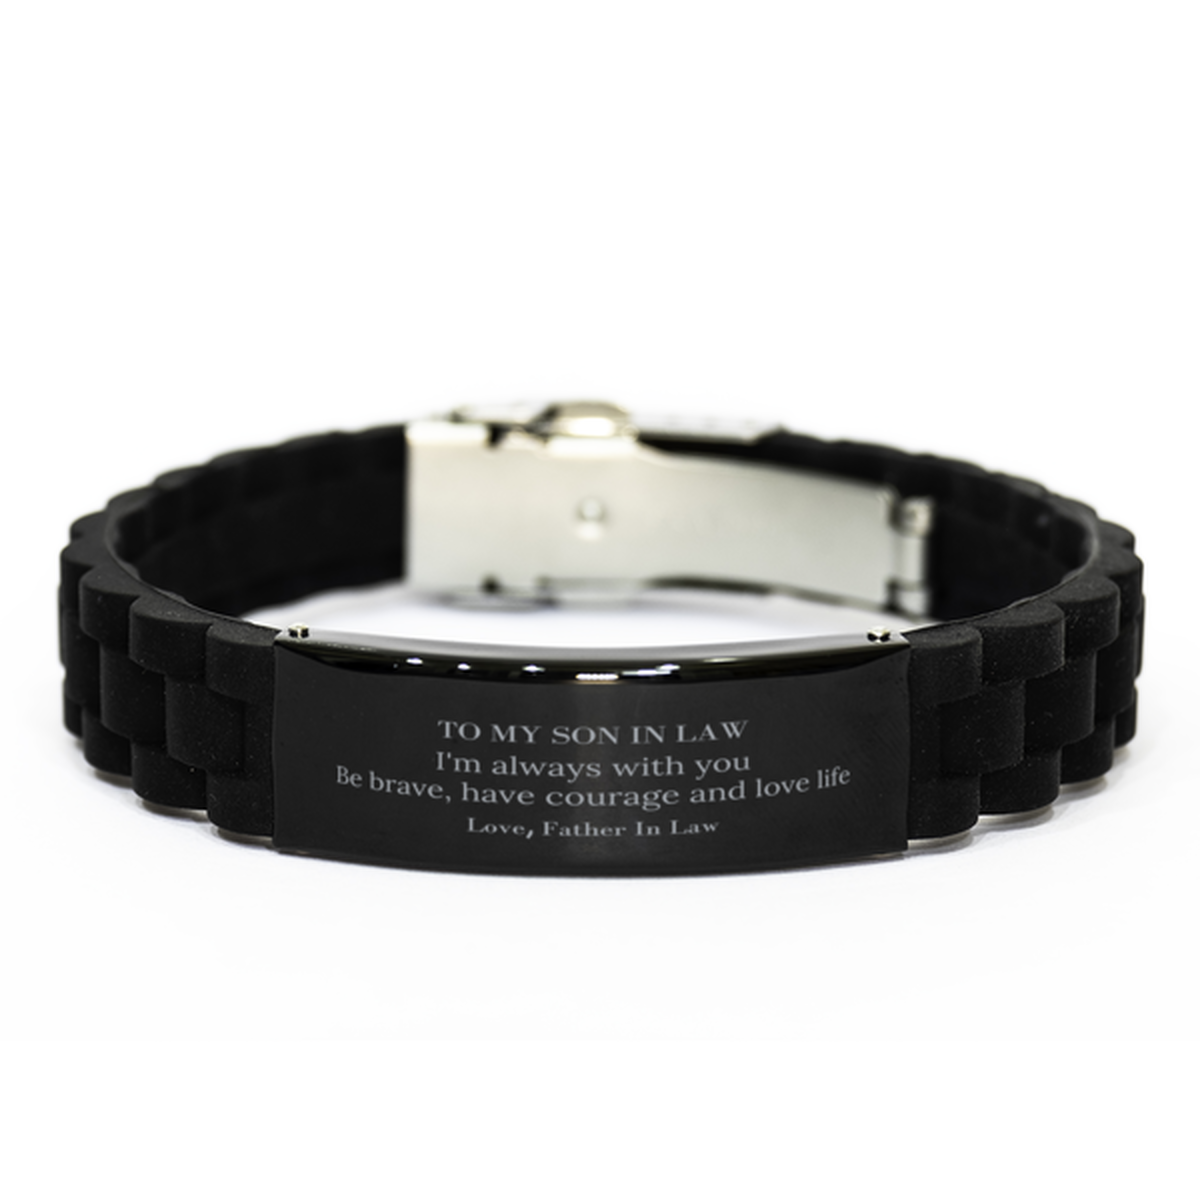 To My Son In Law Gifts from Father In Law, Unique Black Glidelock Clasp Bracelet Inspirational Christmas Birthday Graduation Gifts for Son In Law I'm always with you. Be brave, have courage and love life. Love, Father In Law